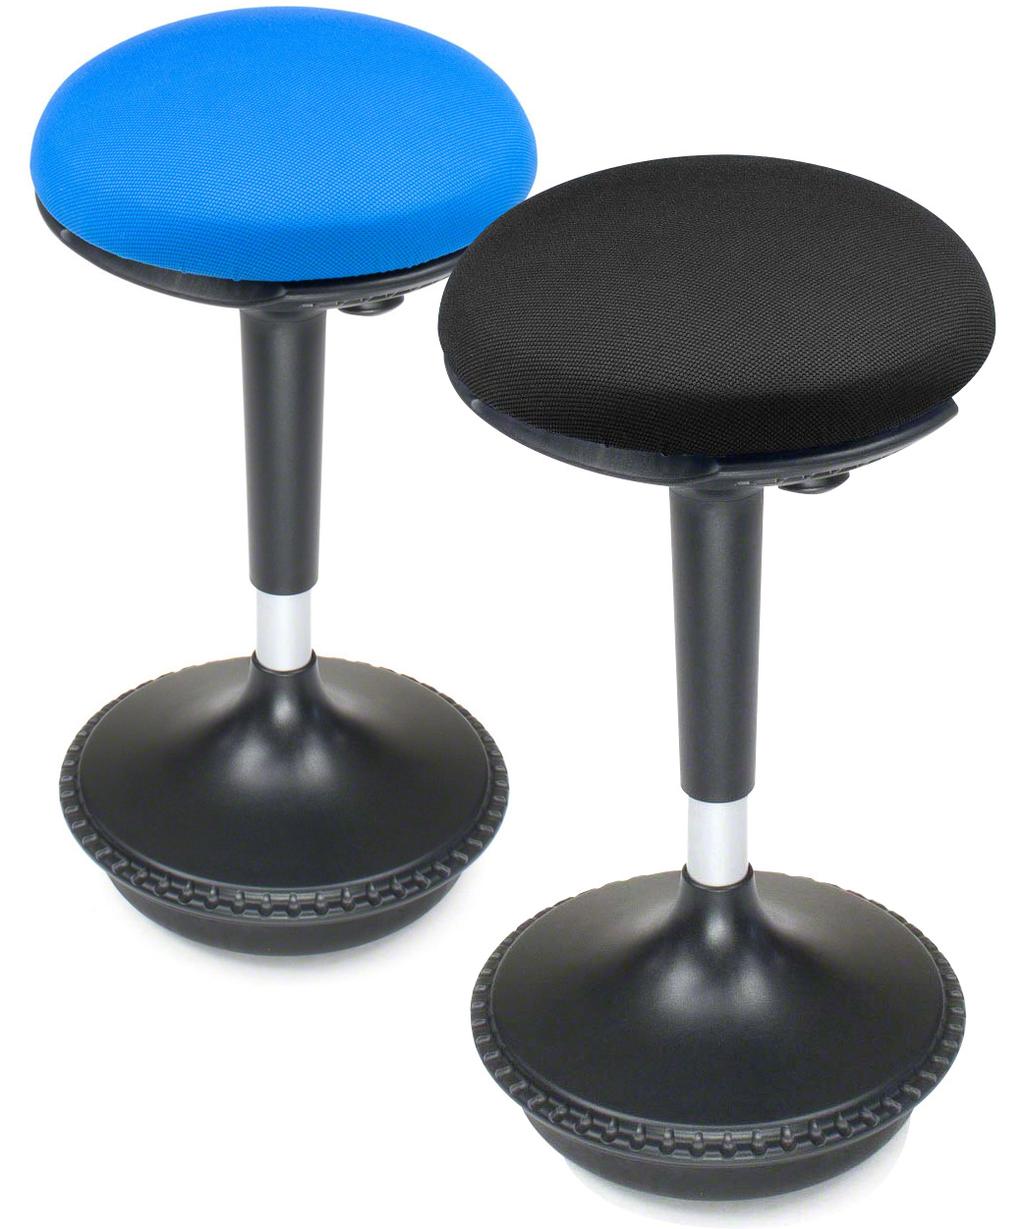 Fully adjustable sit-stand chair with 10 of height adjustment via easy-push buttons that are evenly placed around the underside of the seat Encourages a full range of motion, from active sitting to